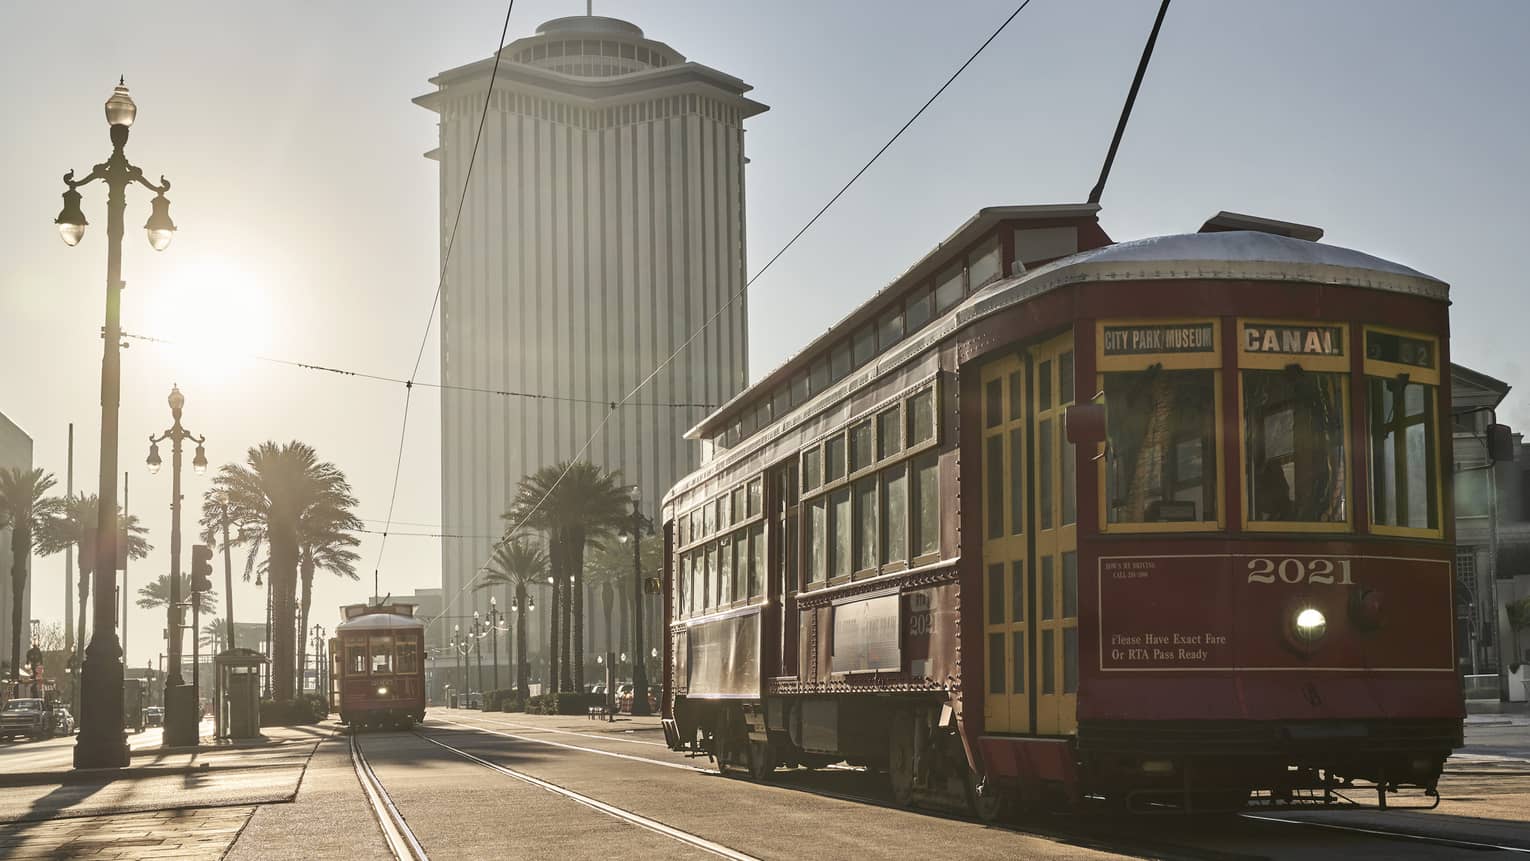 A new orleans train on a brightly lit road with Four Seasons New Orleans in the background